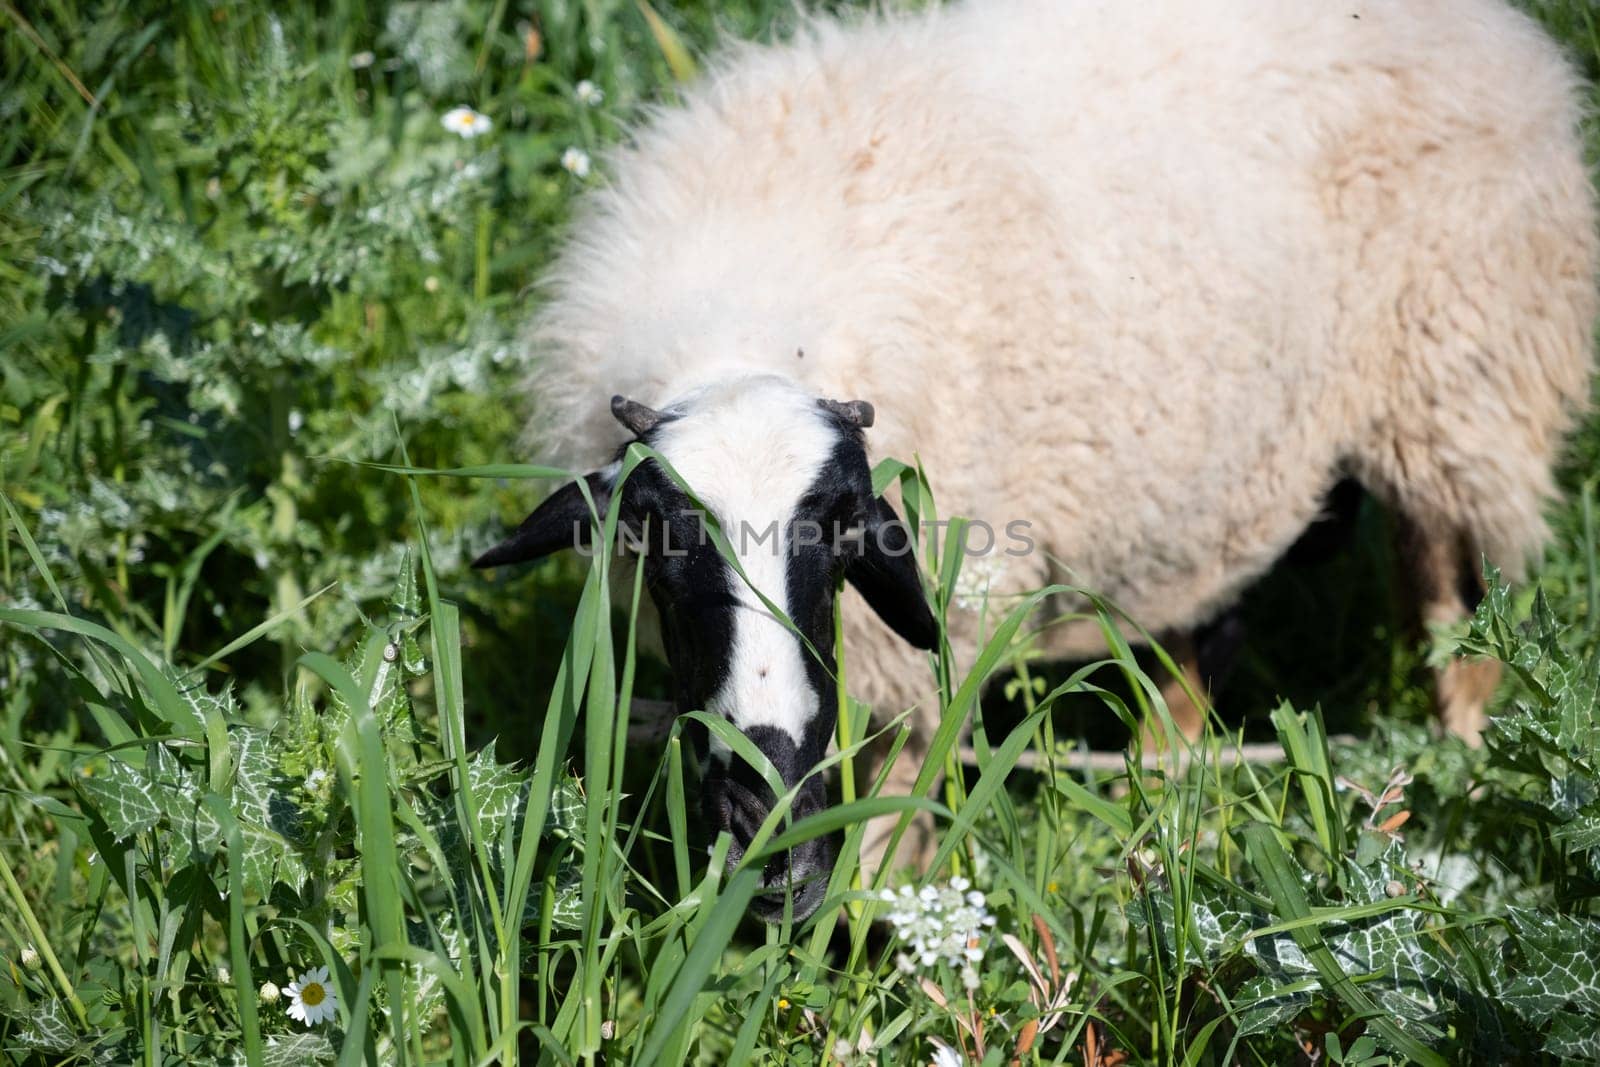 View of white sheep grazing on the green field